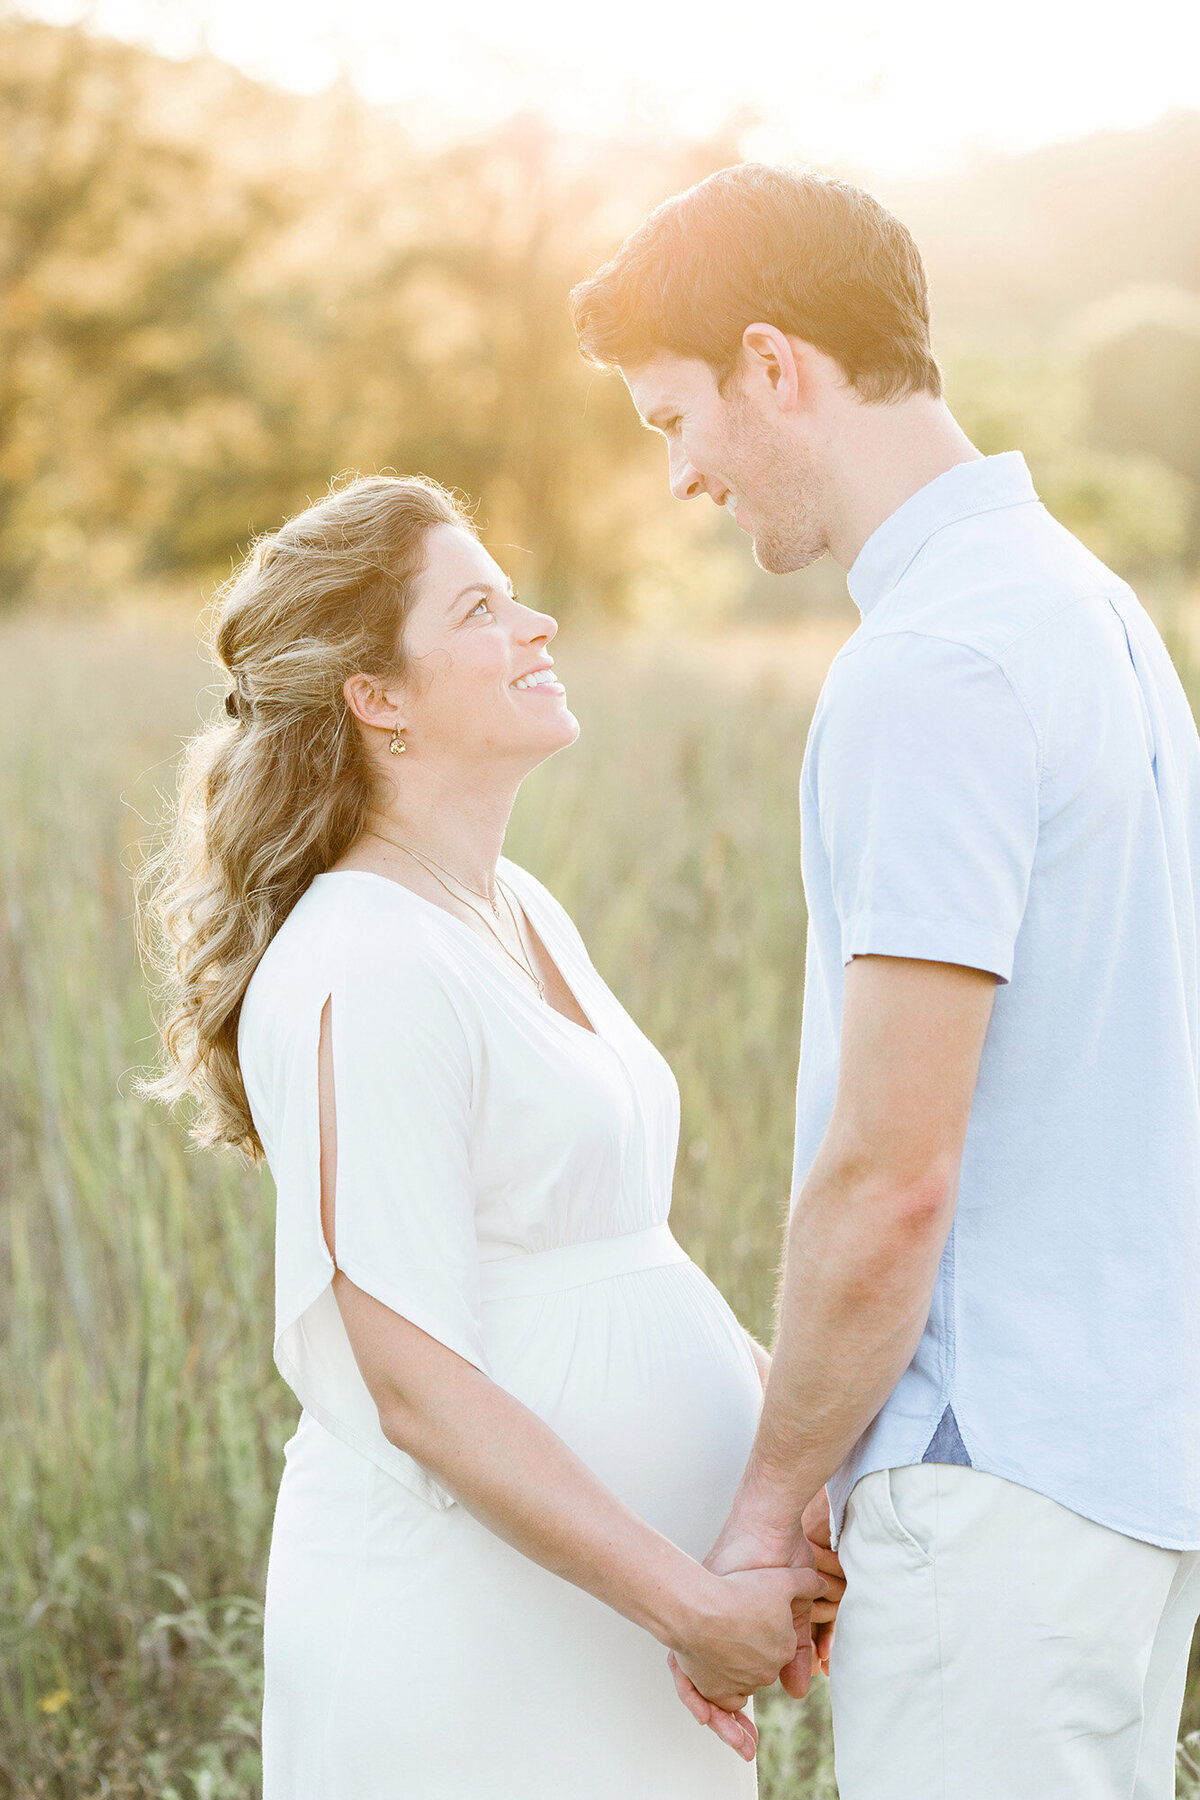 Louisville Ky park perfect for photos pregnant couple holding hands during maternity photos